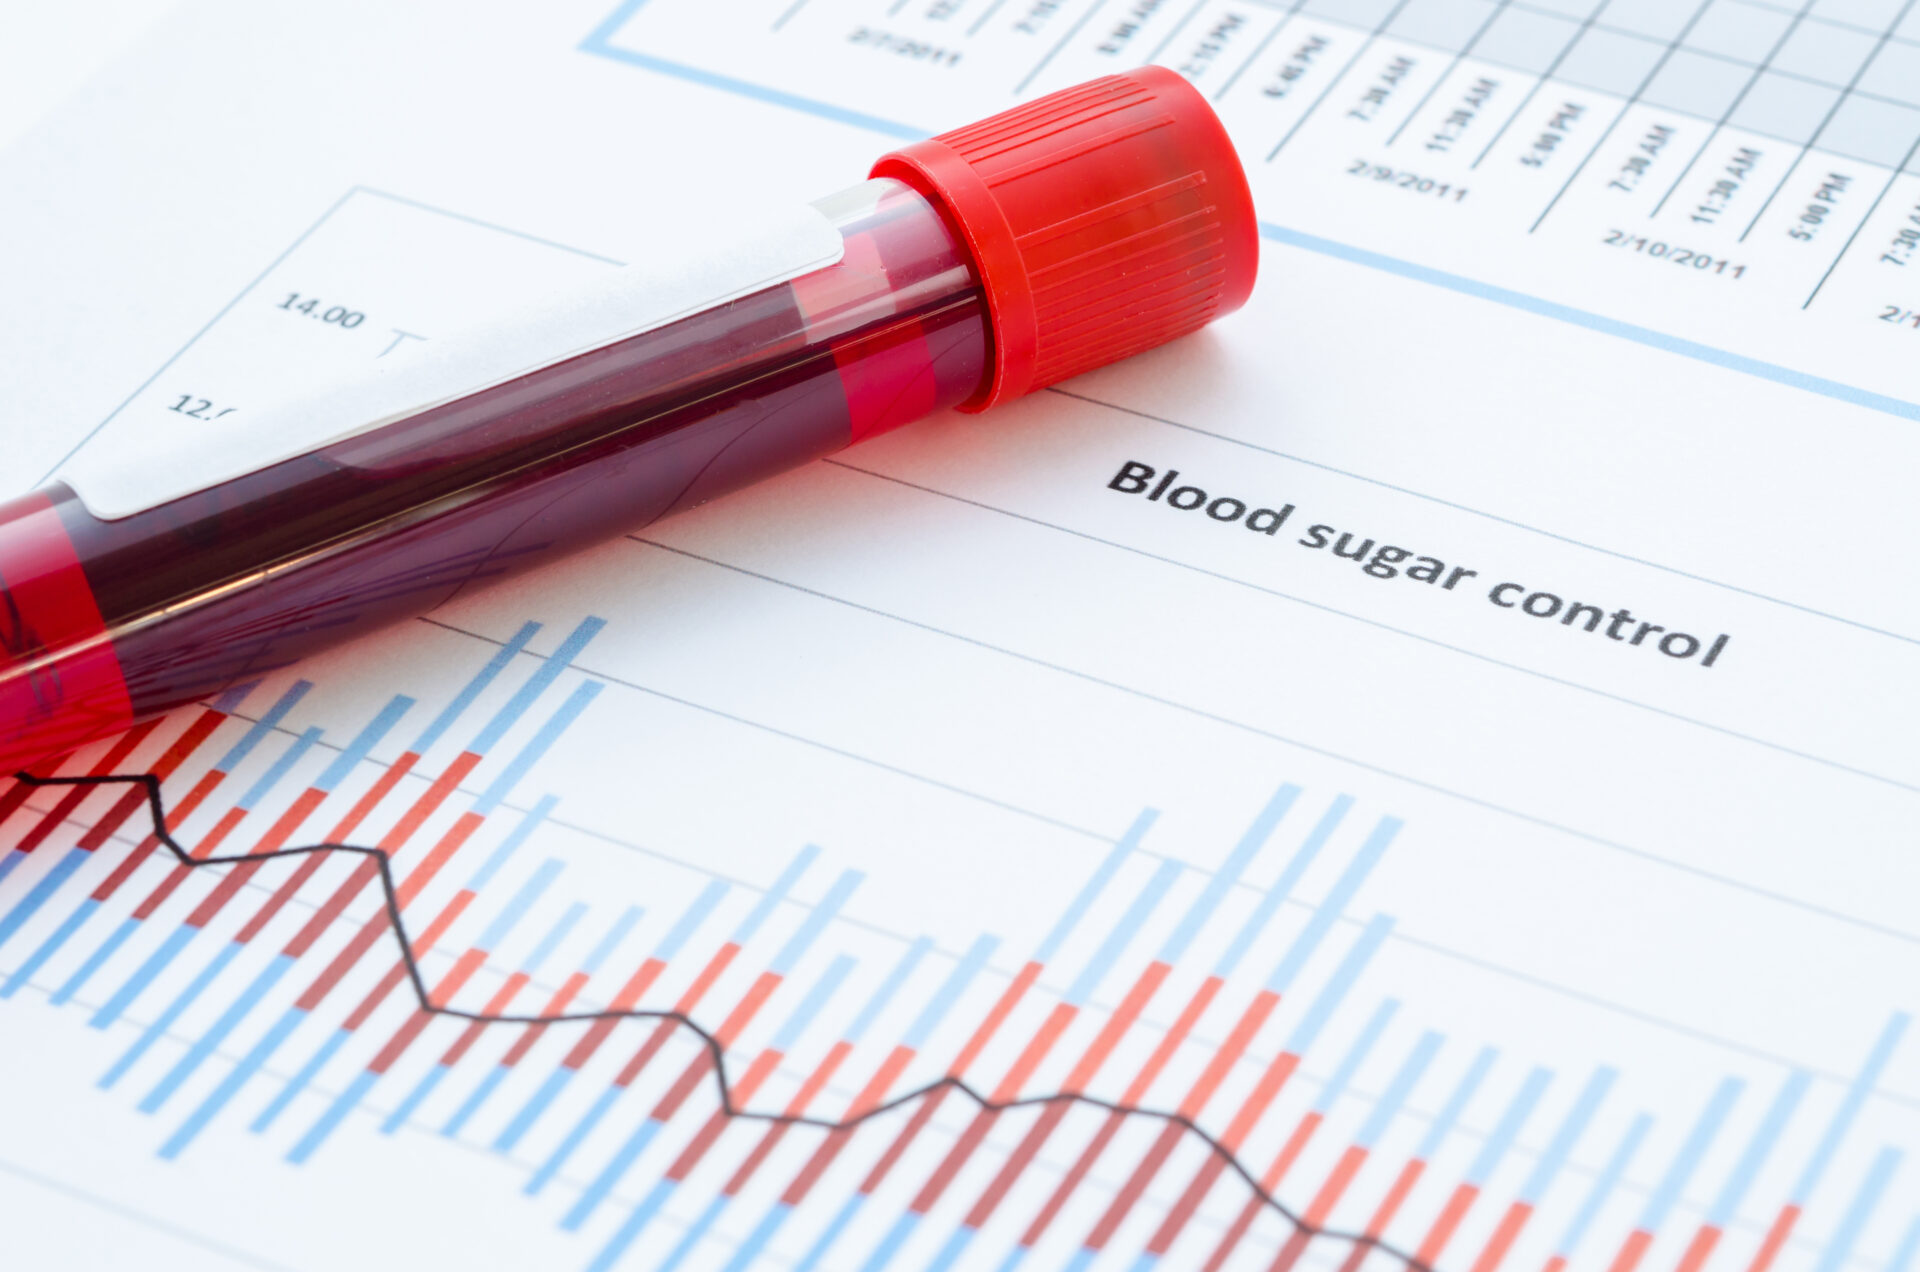 Patients with high blood sugar levels could be at more risk of serious Covid-19. Photo by Penpicks Studio, Shutterstock